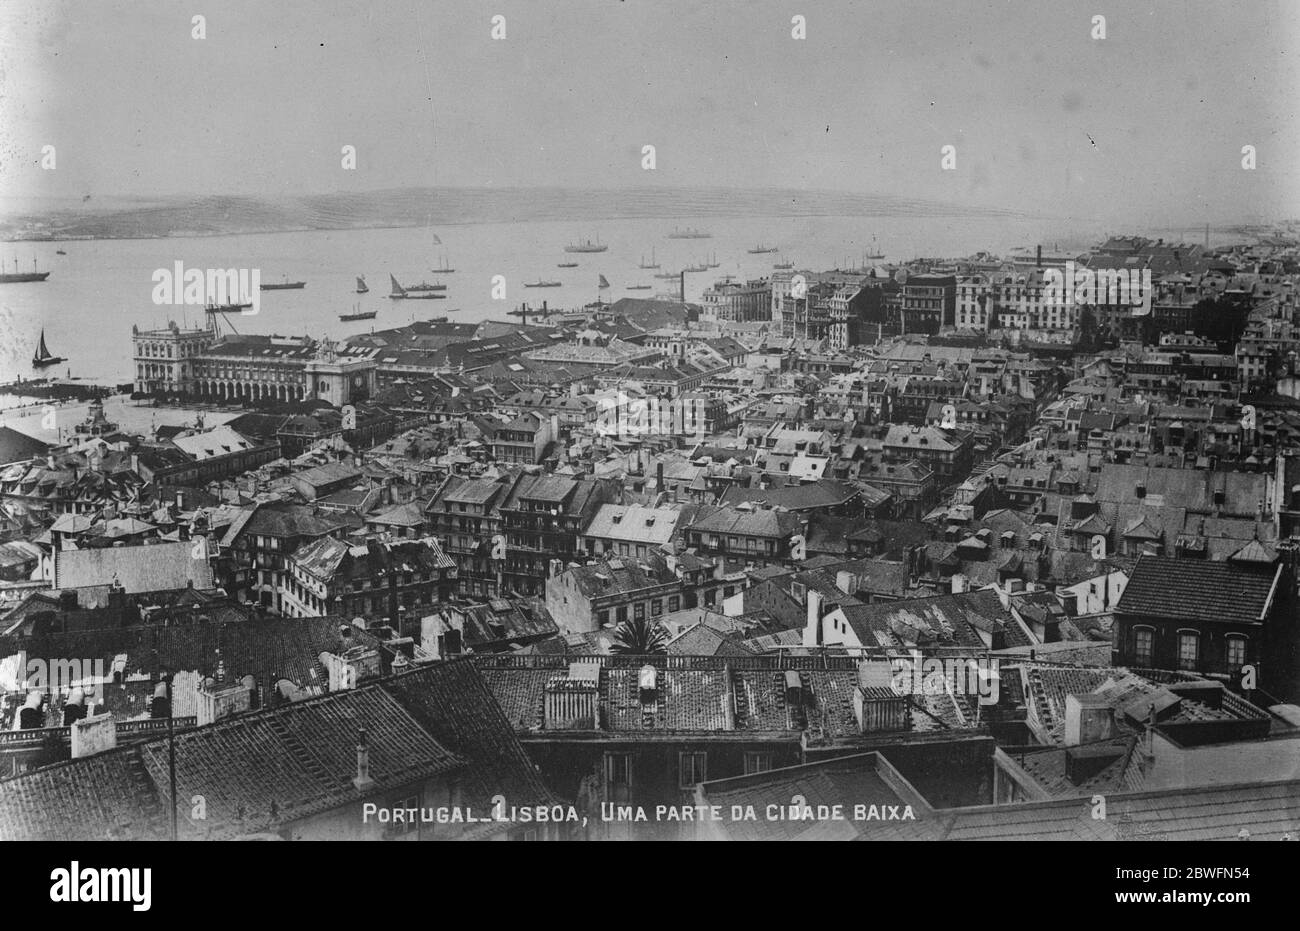 Reported armed revolt in Lisbon The sea of Lisbon , where an armed revolt has broken out , with heavy fighting in the streets 3 February 1926 Stock Photo